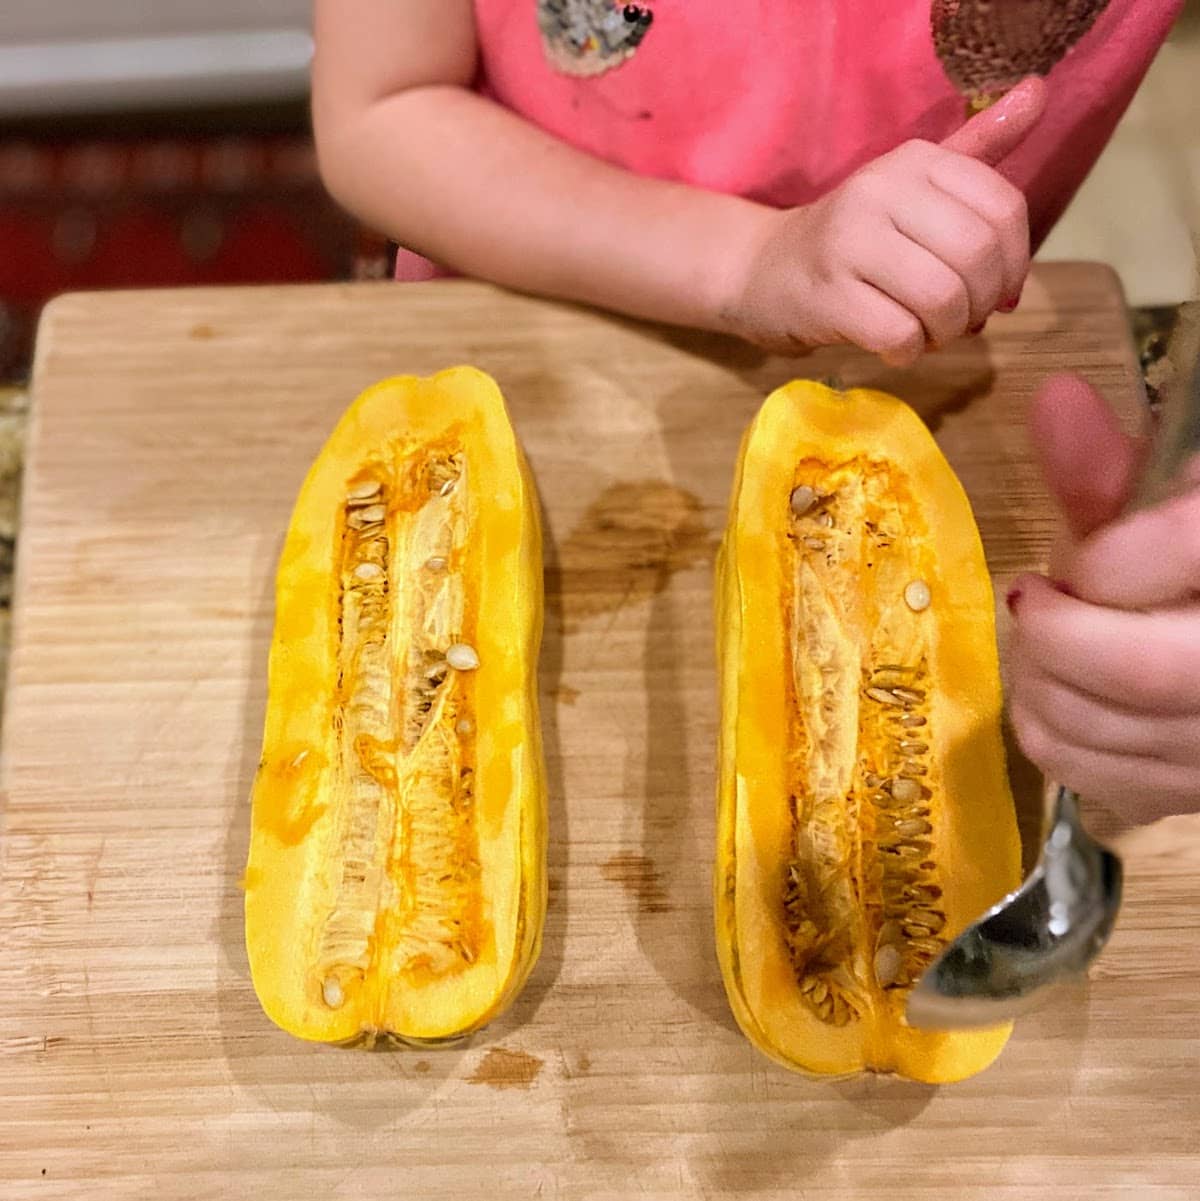 scooping seeds and guts out of delicata squash in order to bake